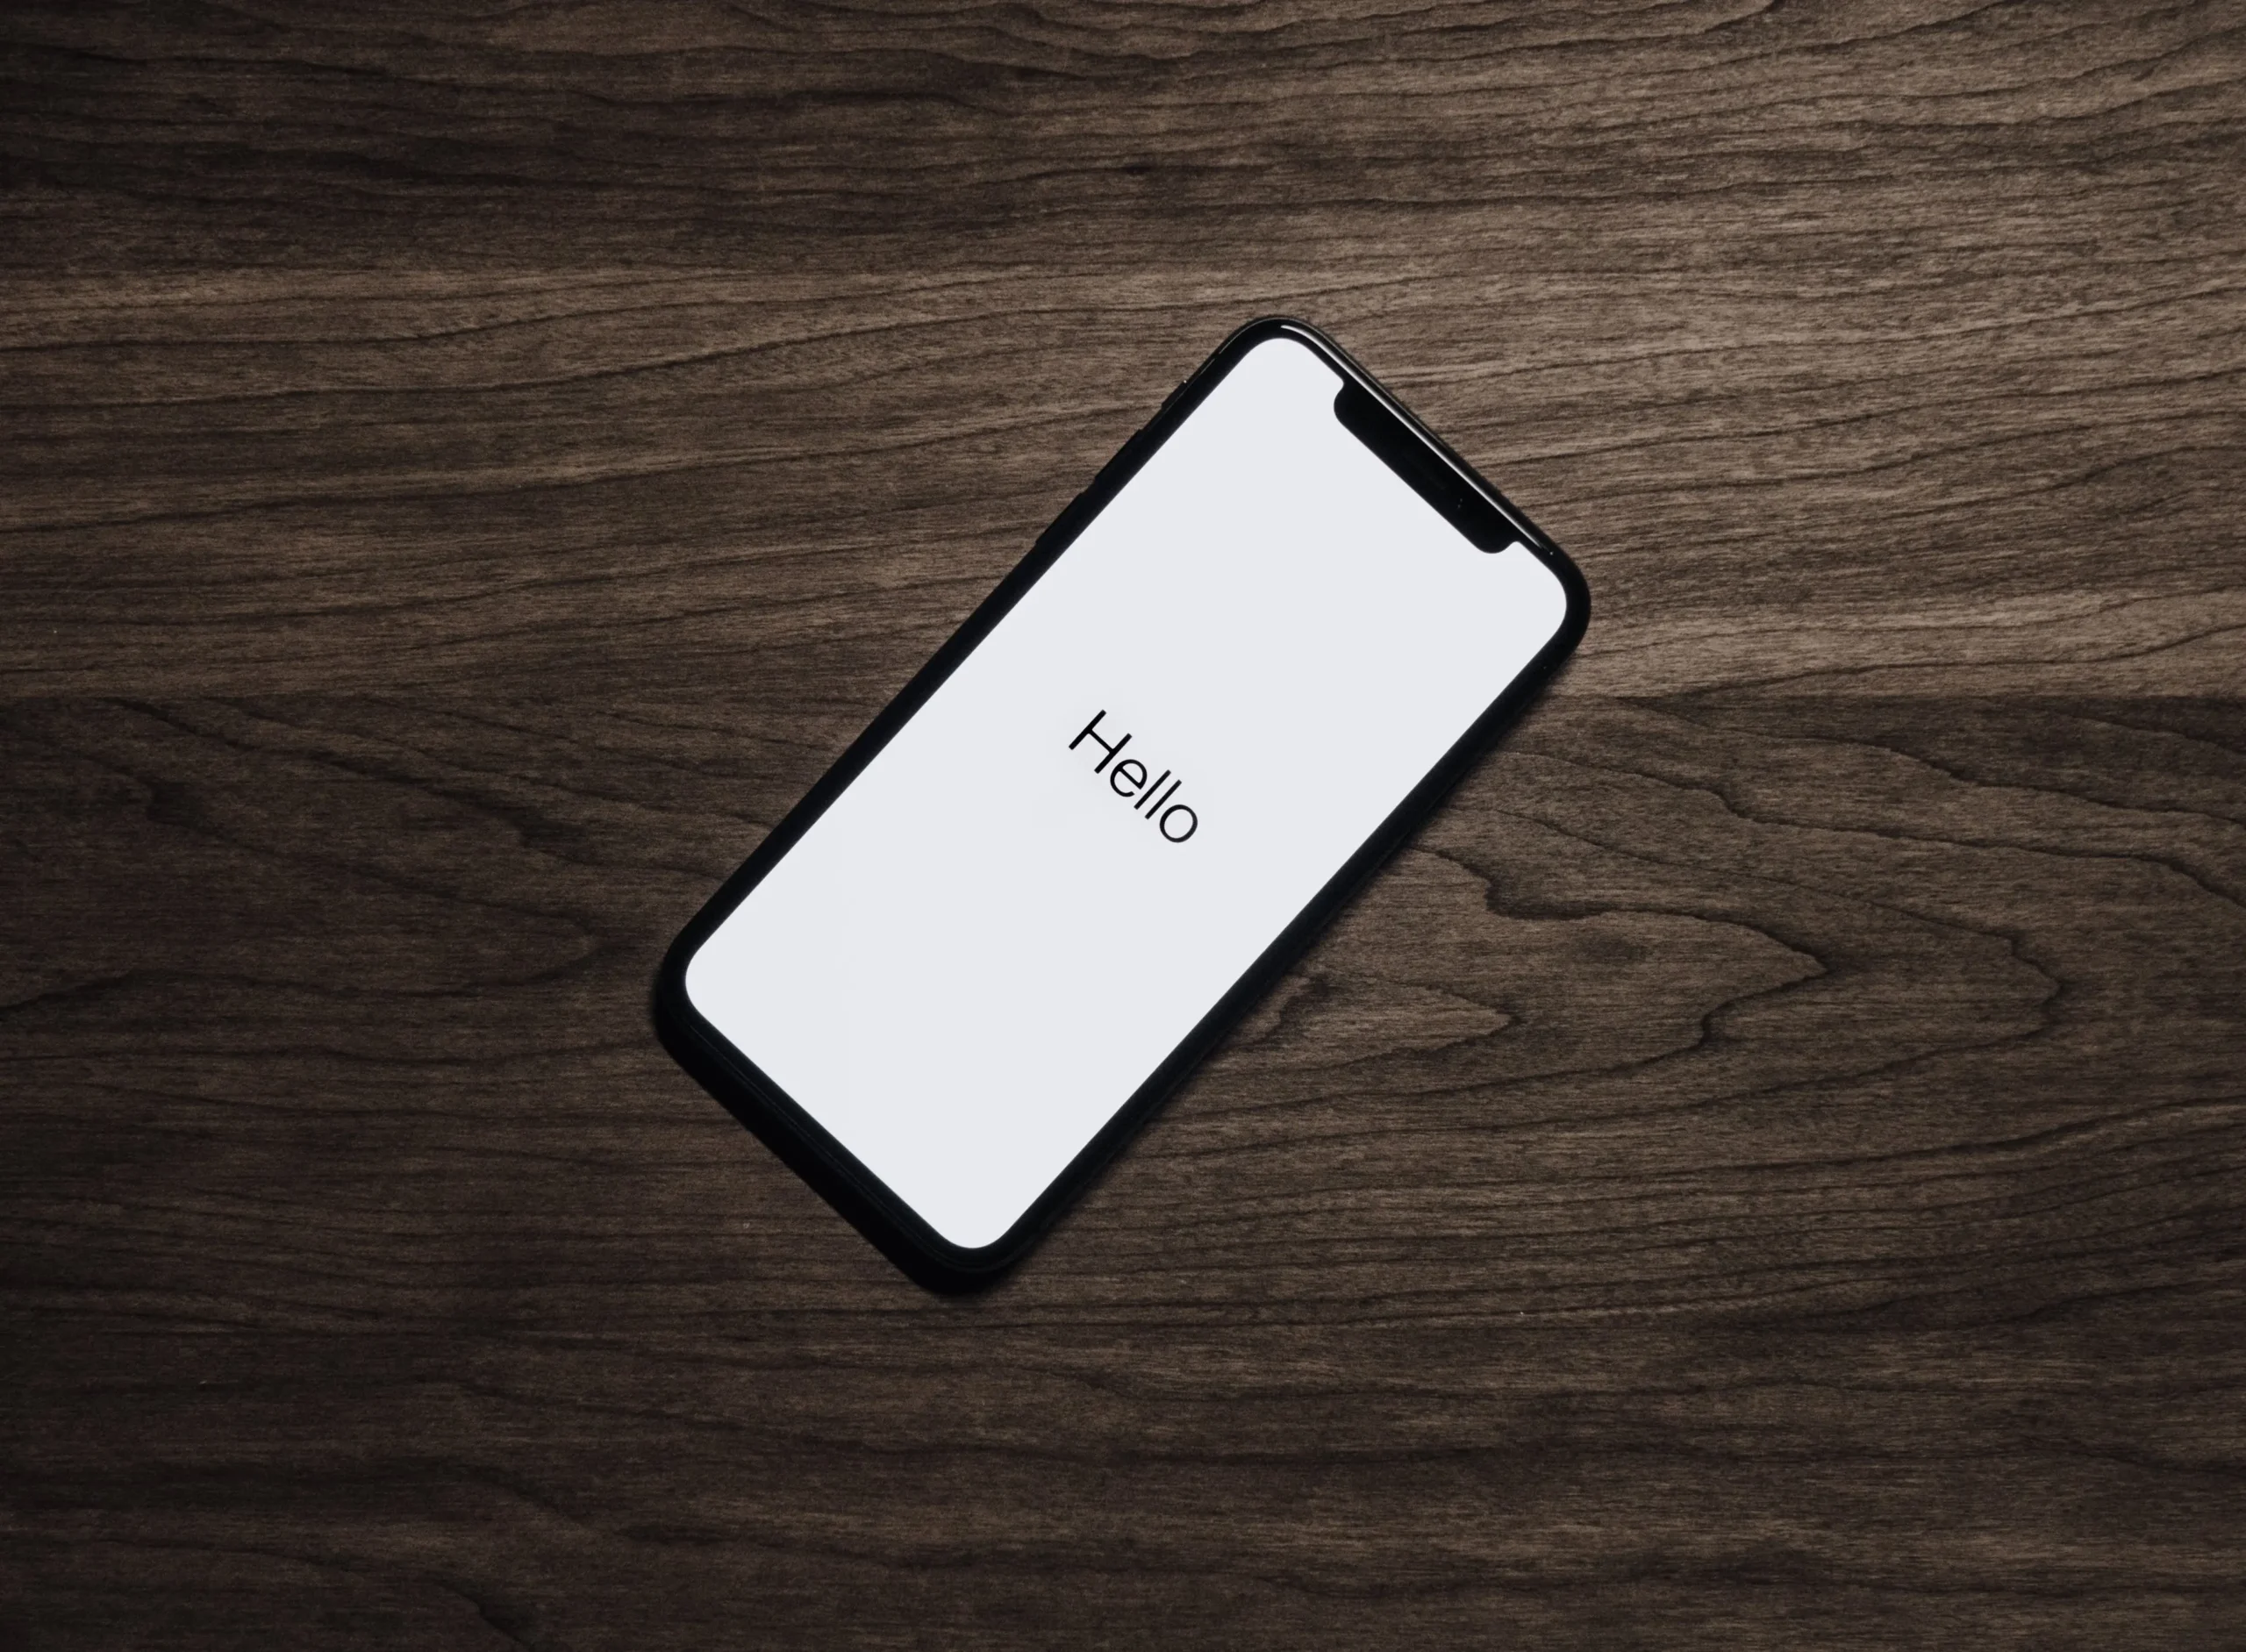 Phone sitting on table with white screen displaying the words "hello"